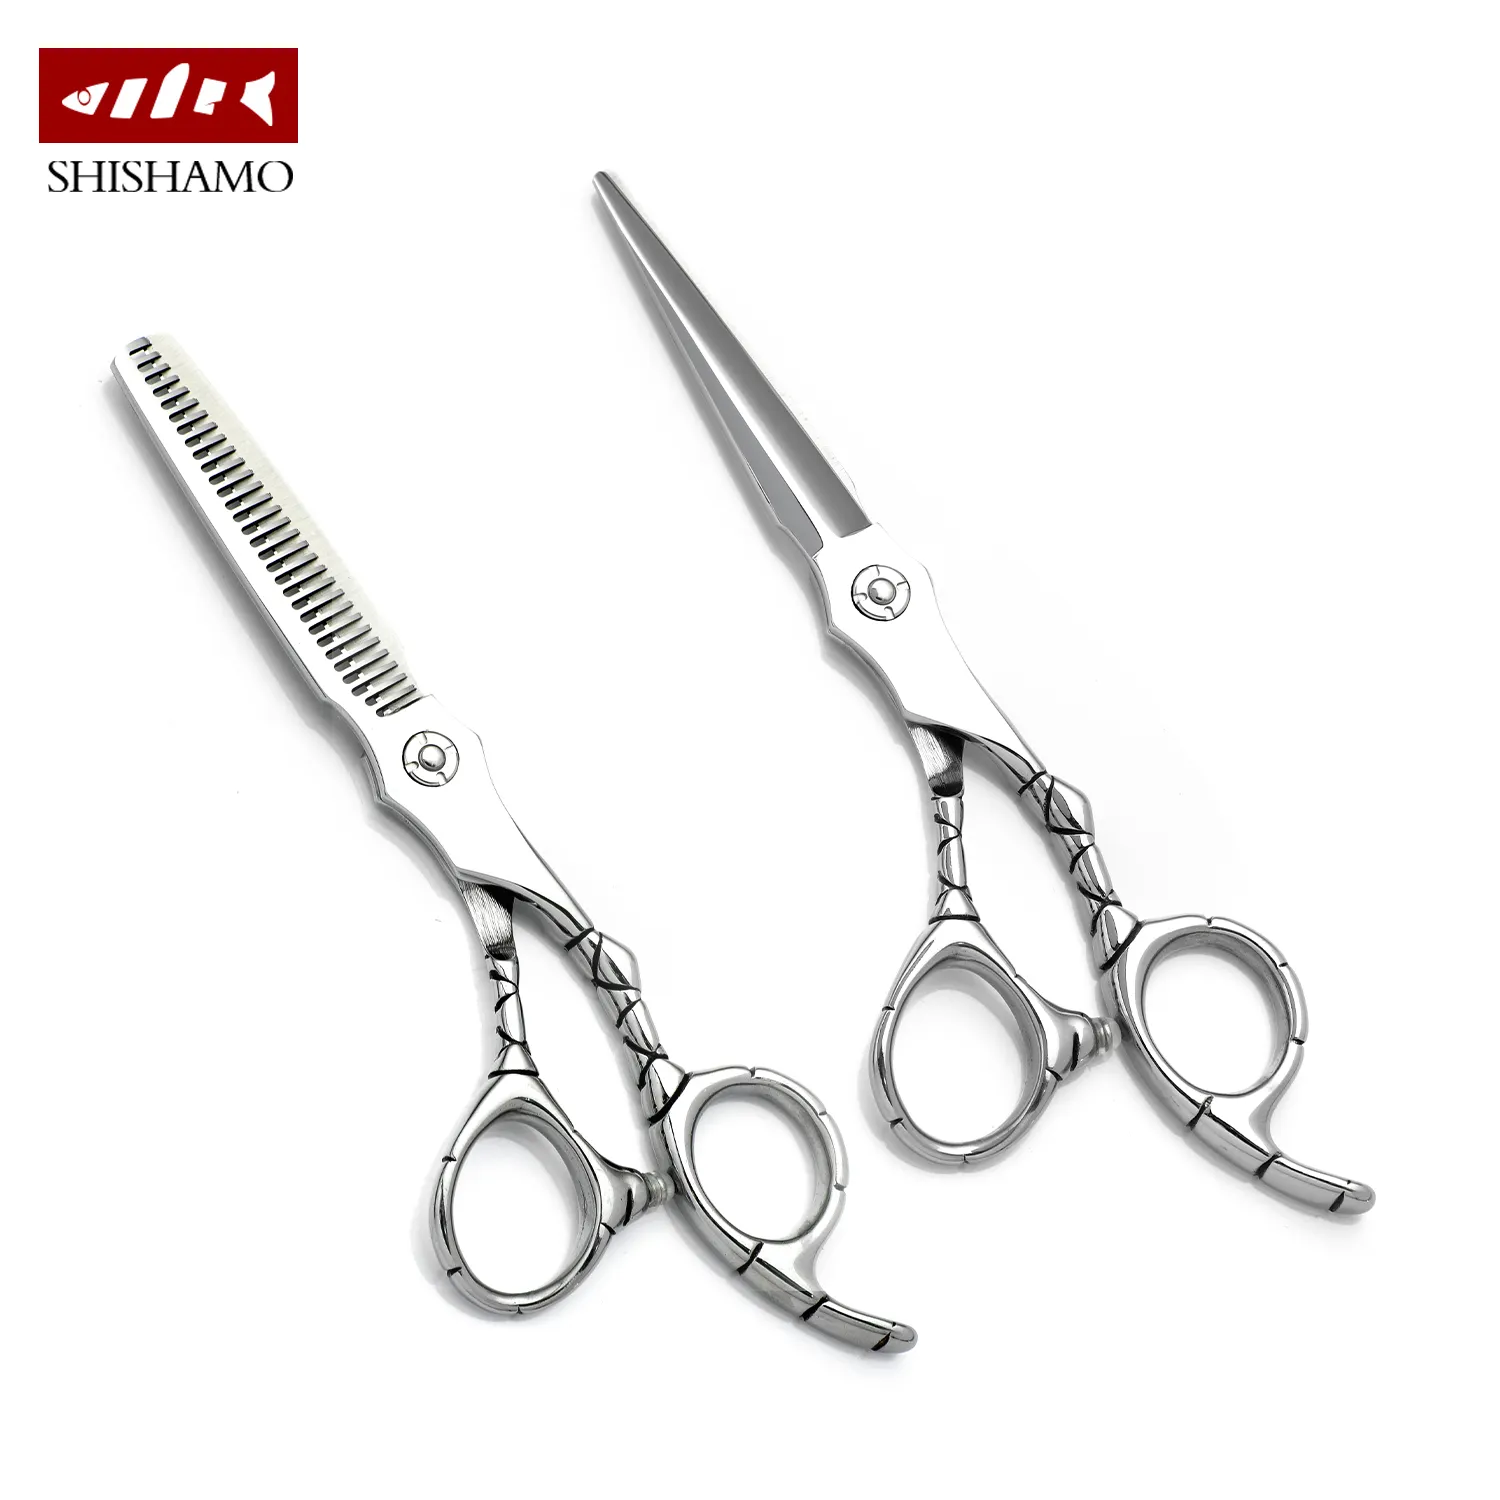 6 Inch Professional Hairdressing Hair Styling scissors hair cutting scissors set for salon